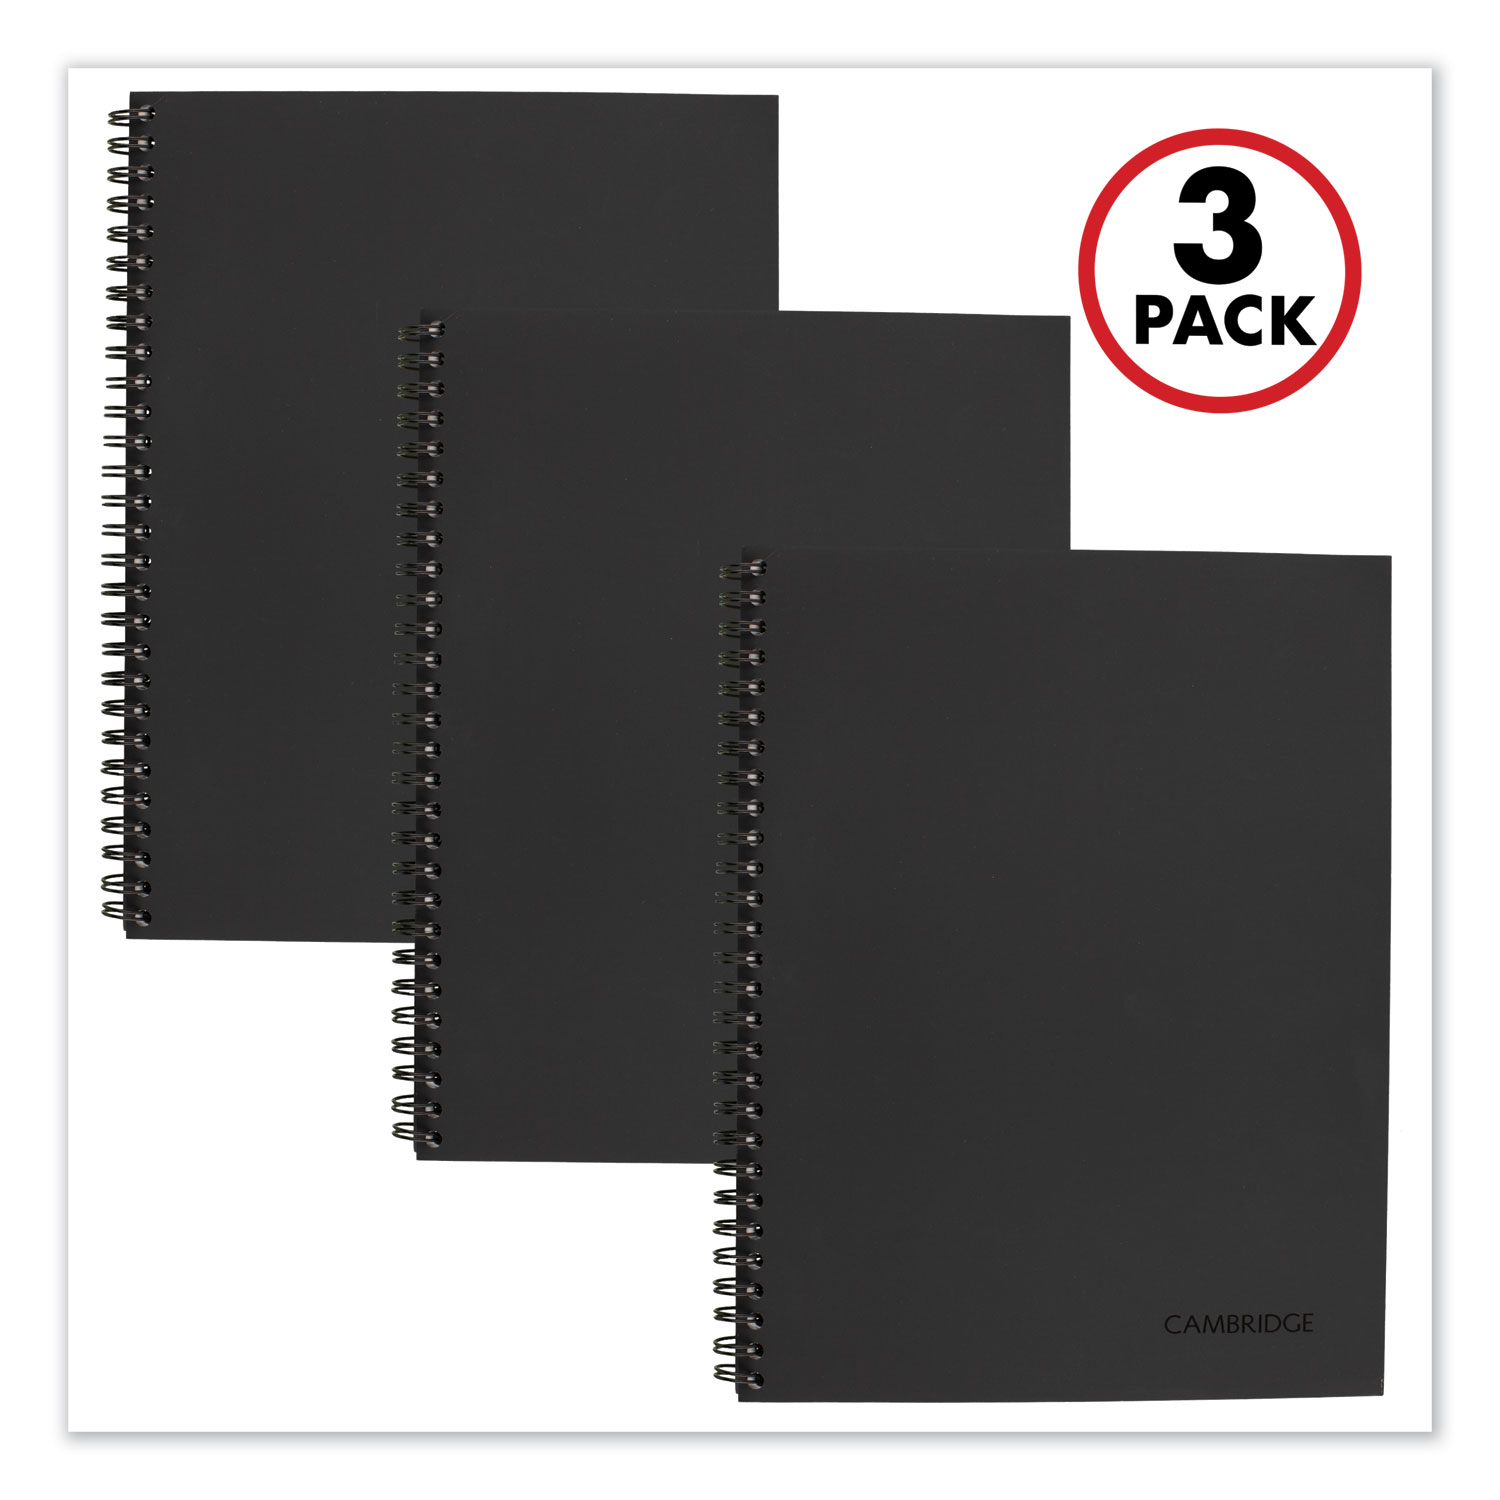  Cambridge 4501201 Wirebound Notebook Plus Pack, Wide/Legal Rule, Black, 9.5 x 7.25, 80 Sheets, 3/Pack (MEA45012) 